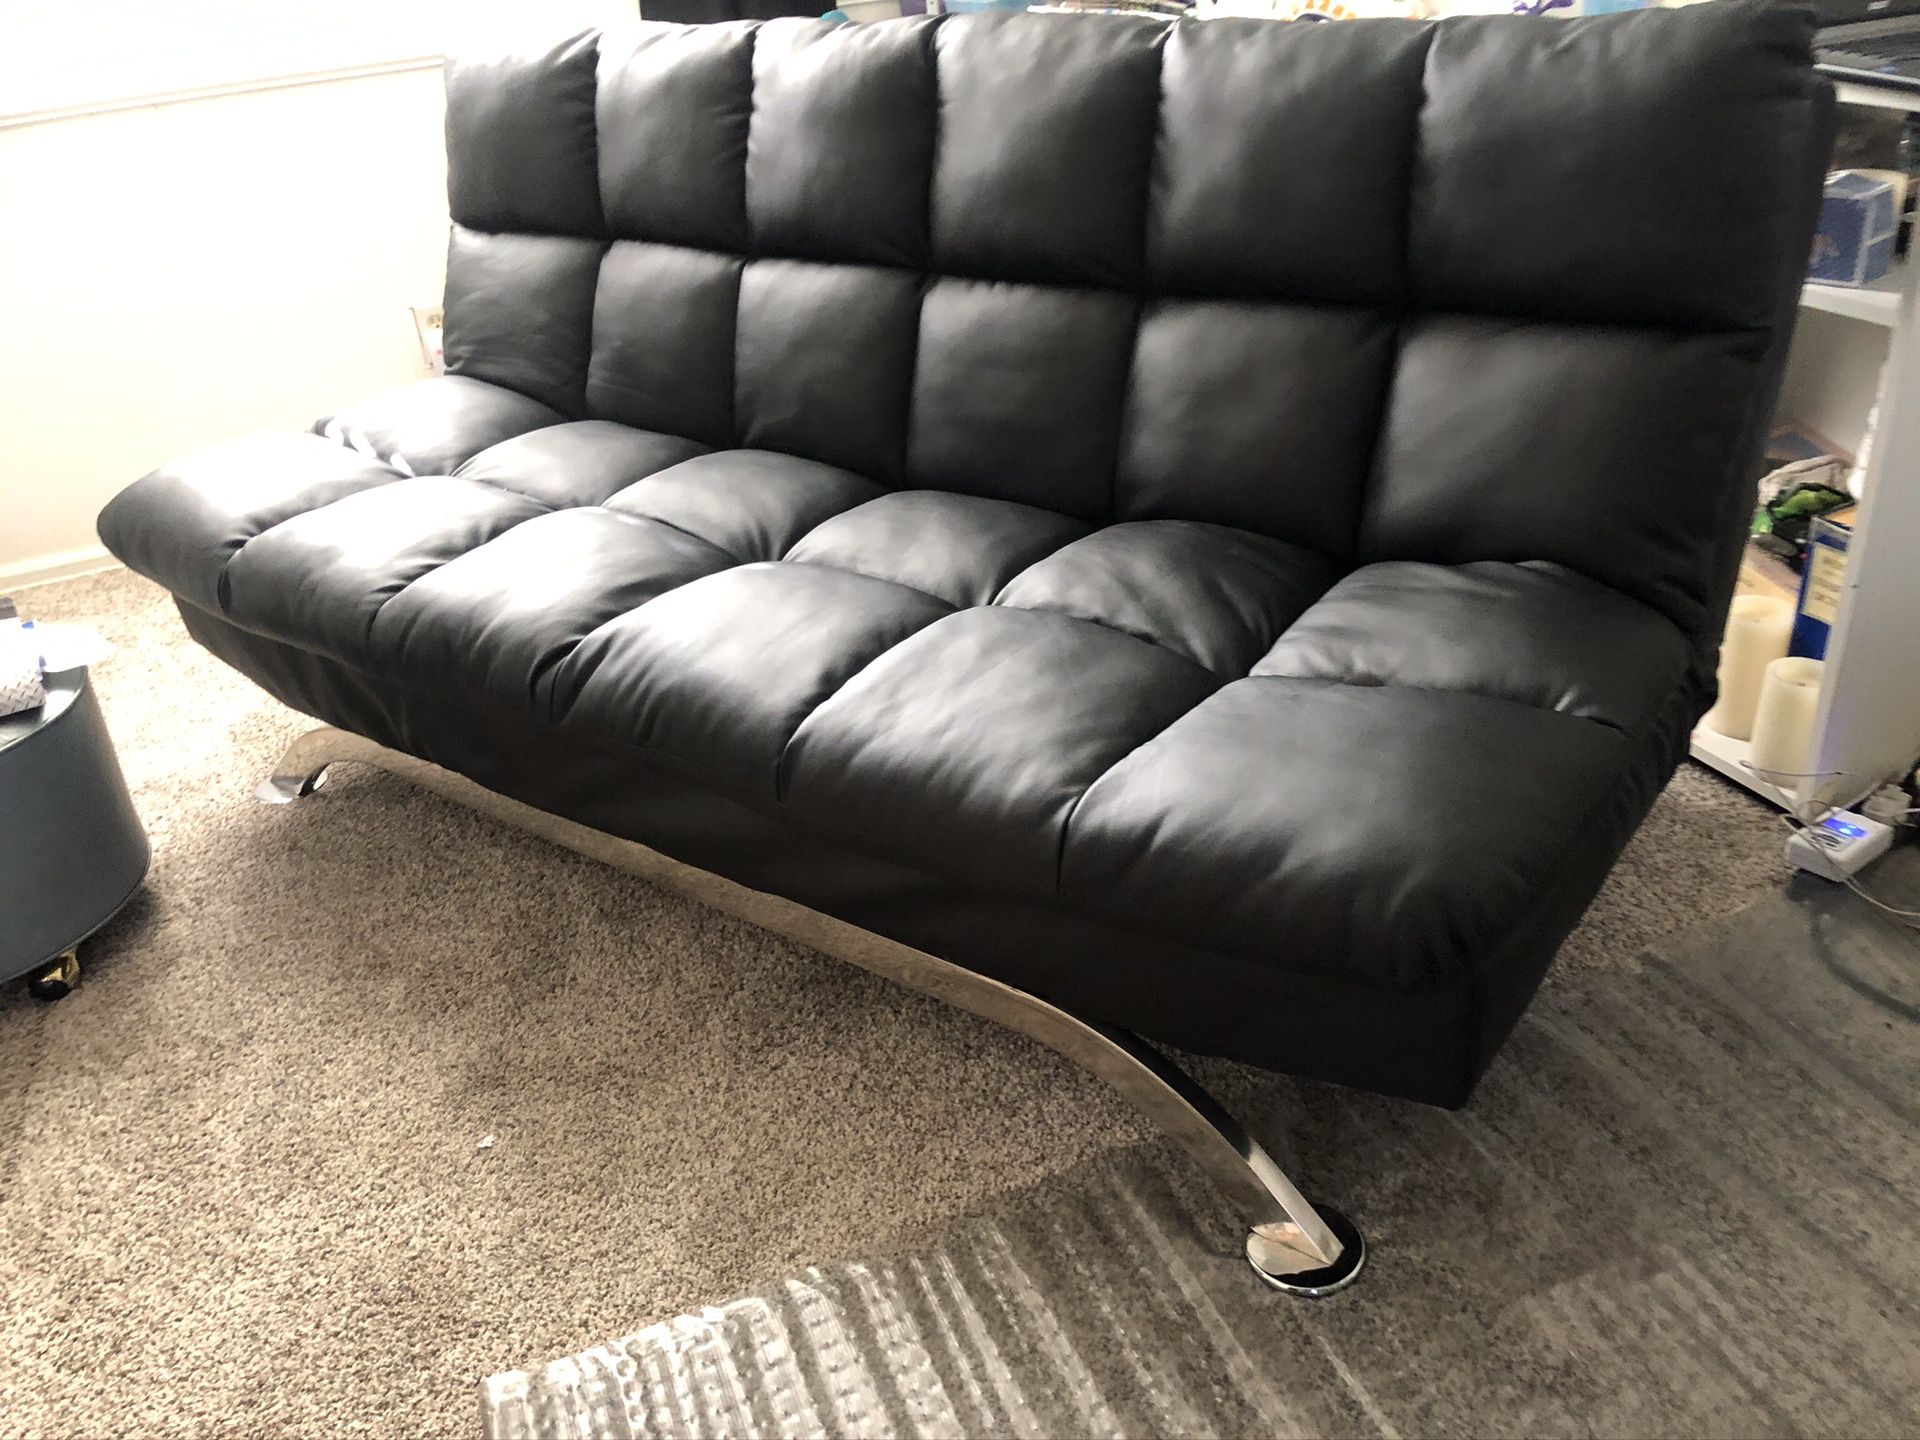 Leather Futon excellent condition $150 firmAF!!!pending pickup!!!!